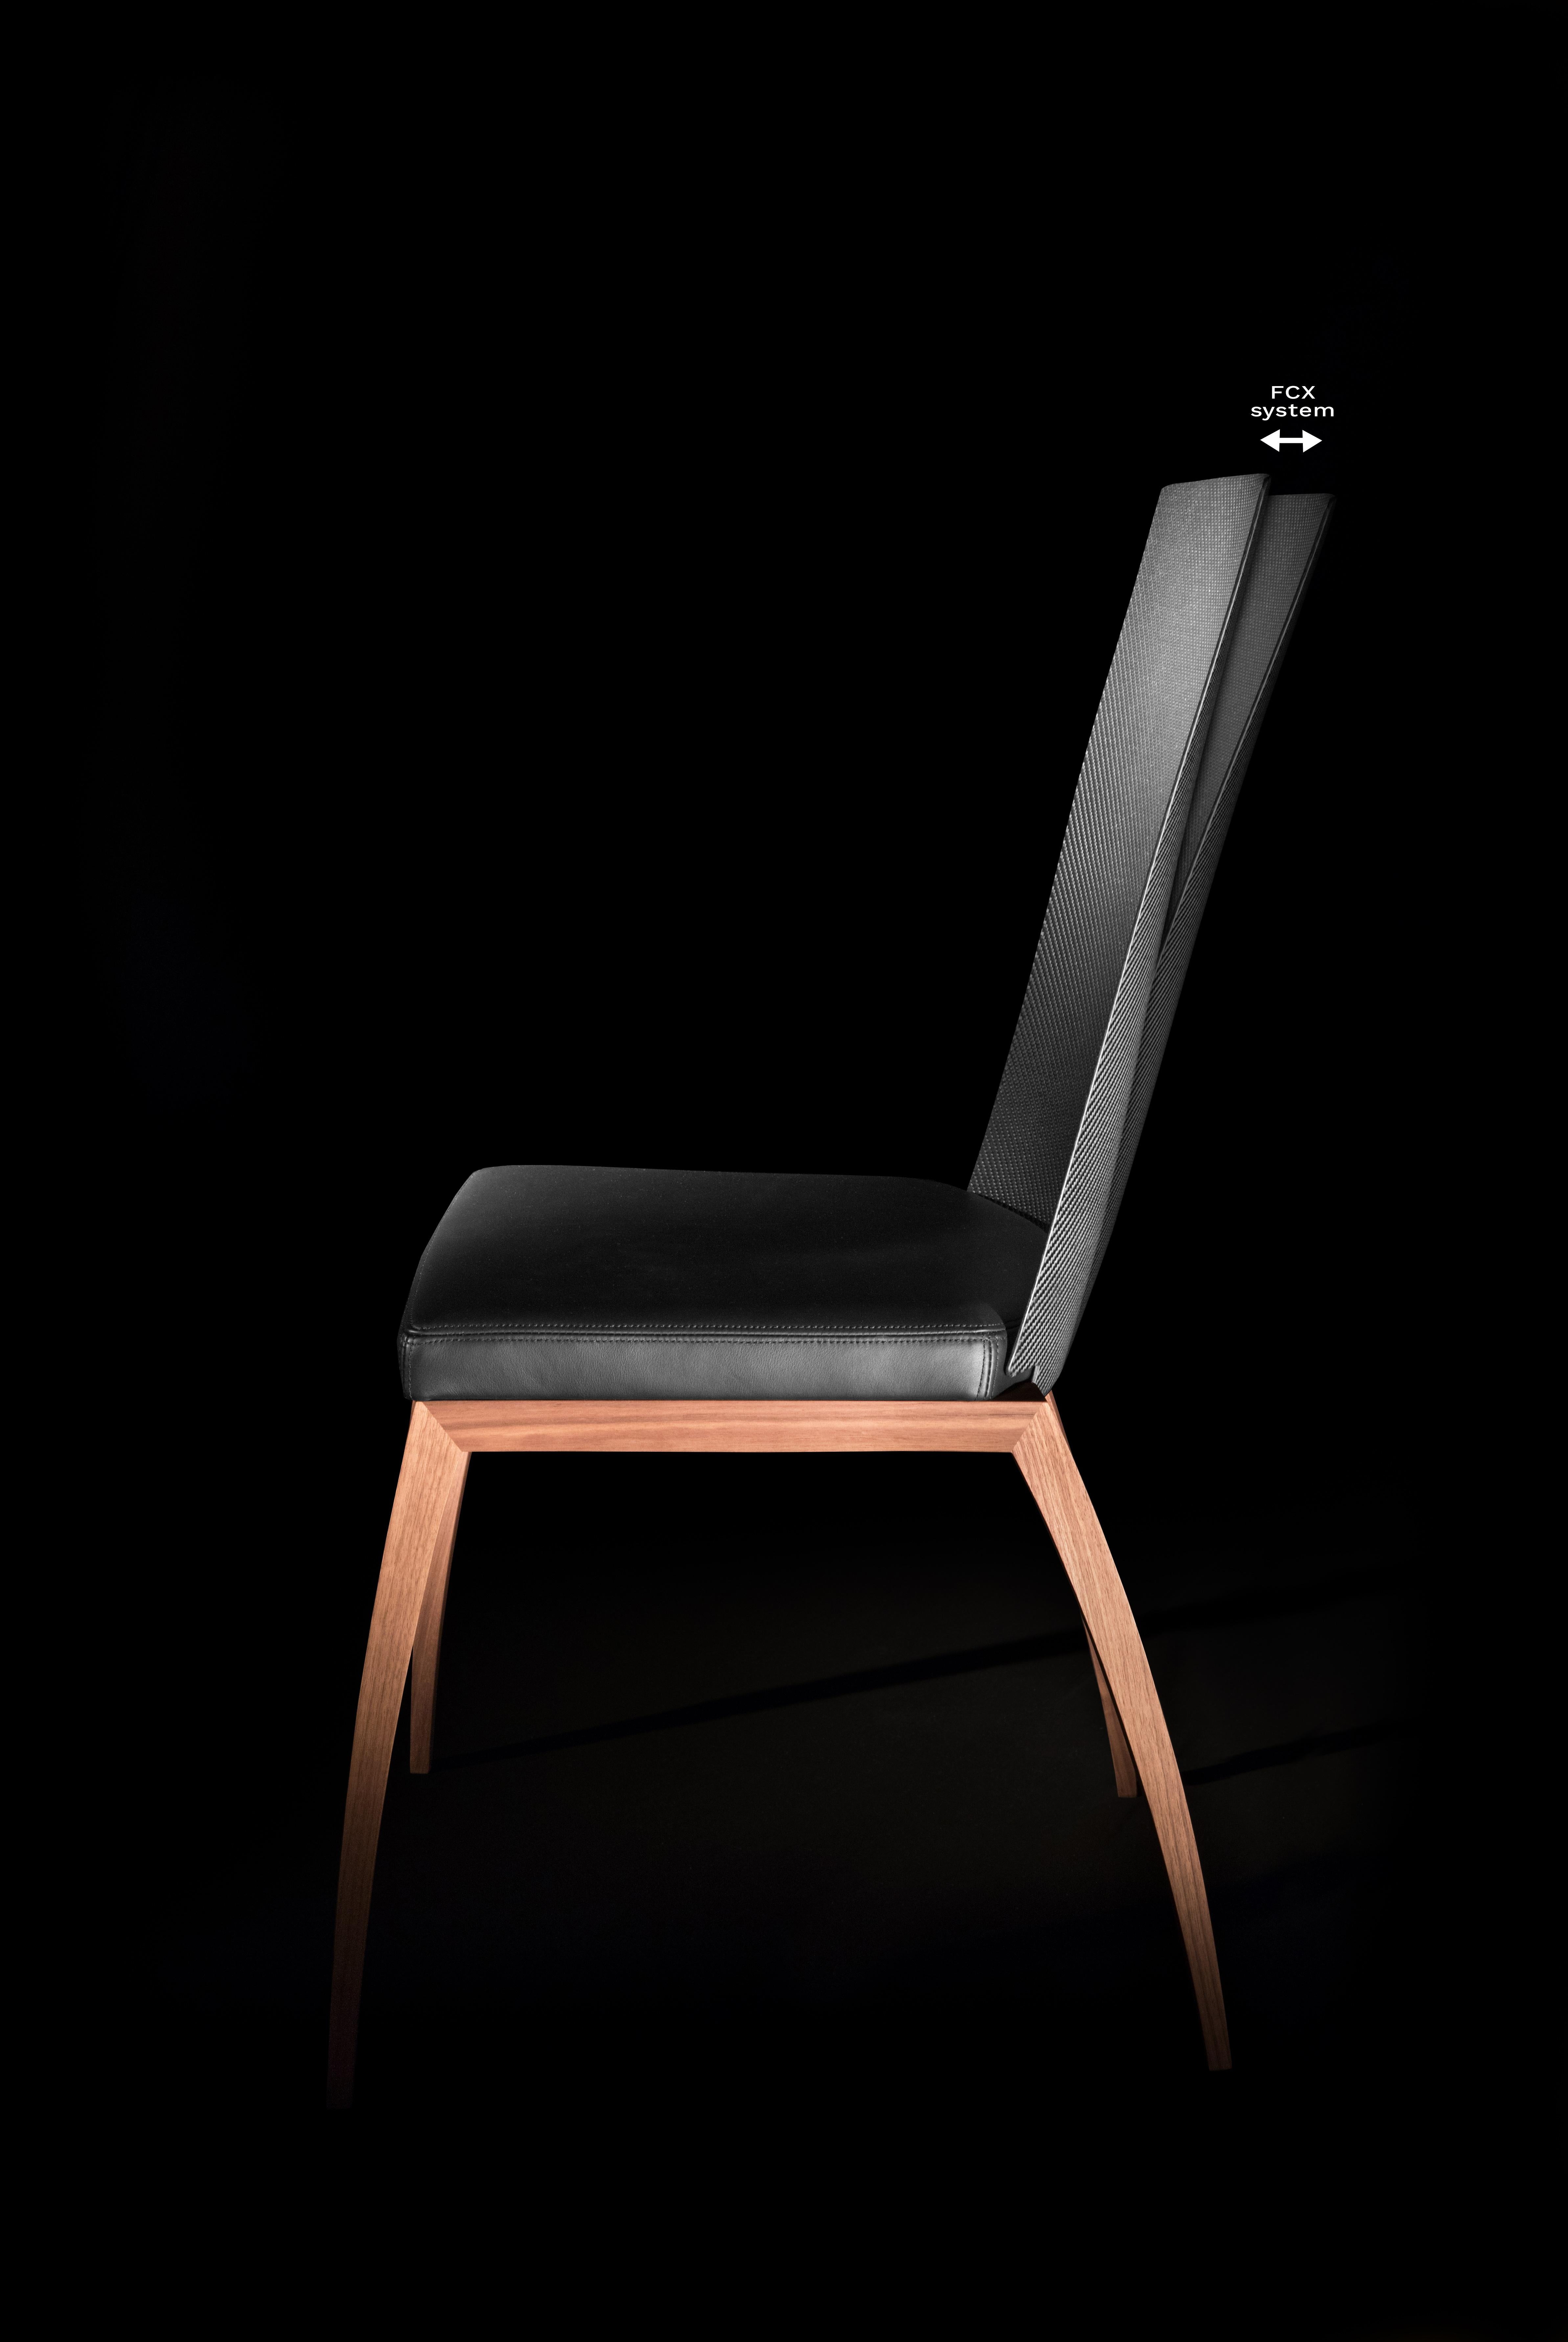 Fibra Chair, Design Chair in Carbon Fiber and Canaletto Walnut, Made in Italy In New Condition For Sale In Barlassina, IT